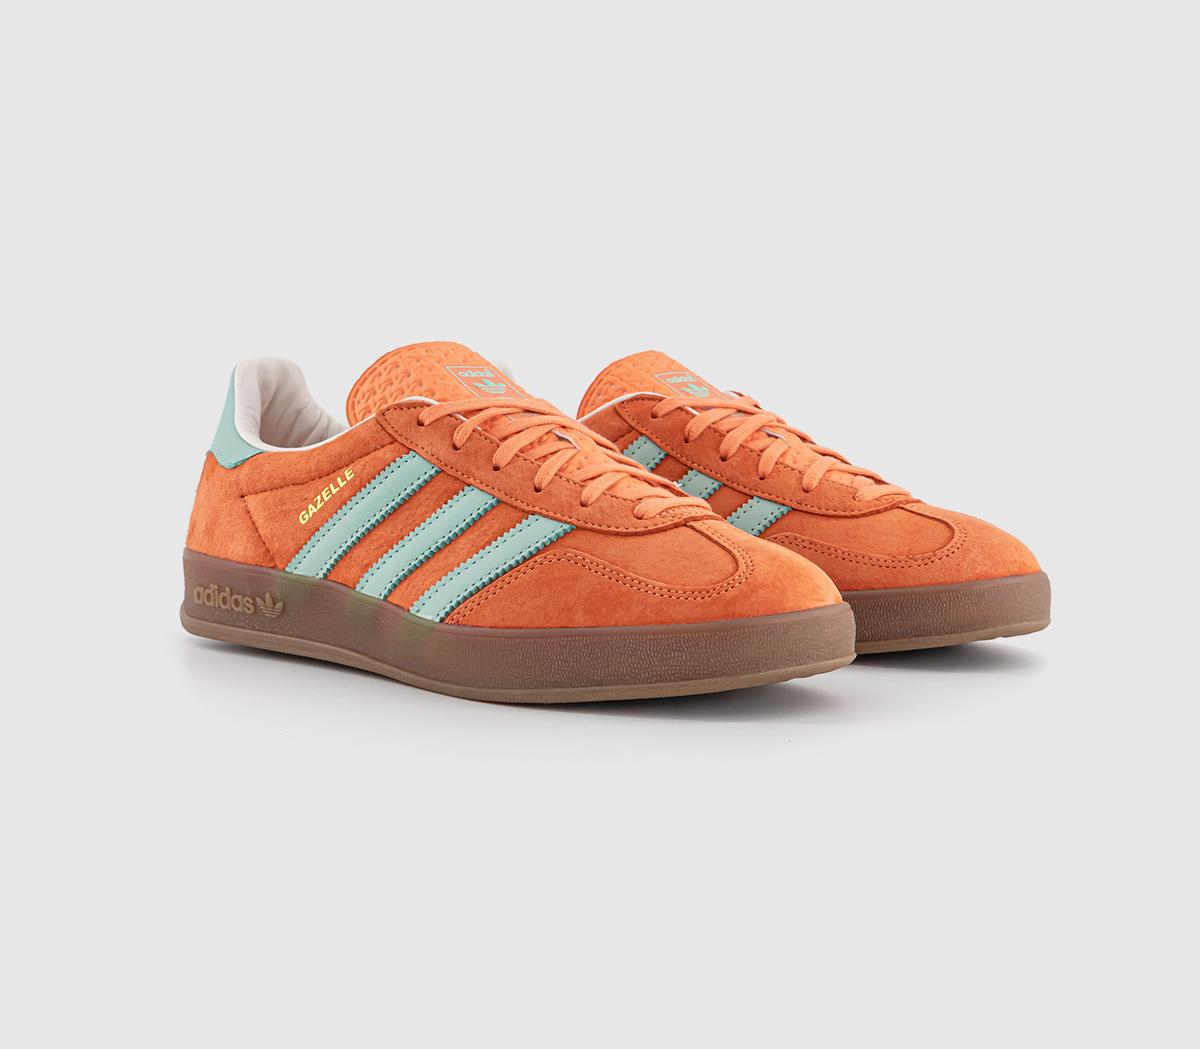 Adidas Gazelle Indoor Trainers Easy Orange Clear Mint Gum Red, 10.5